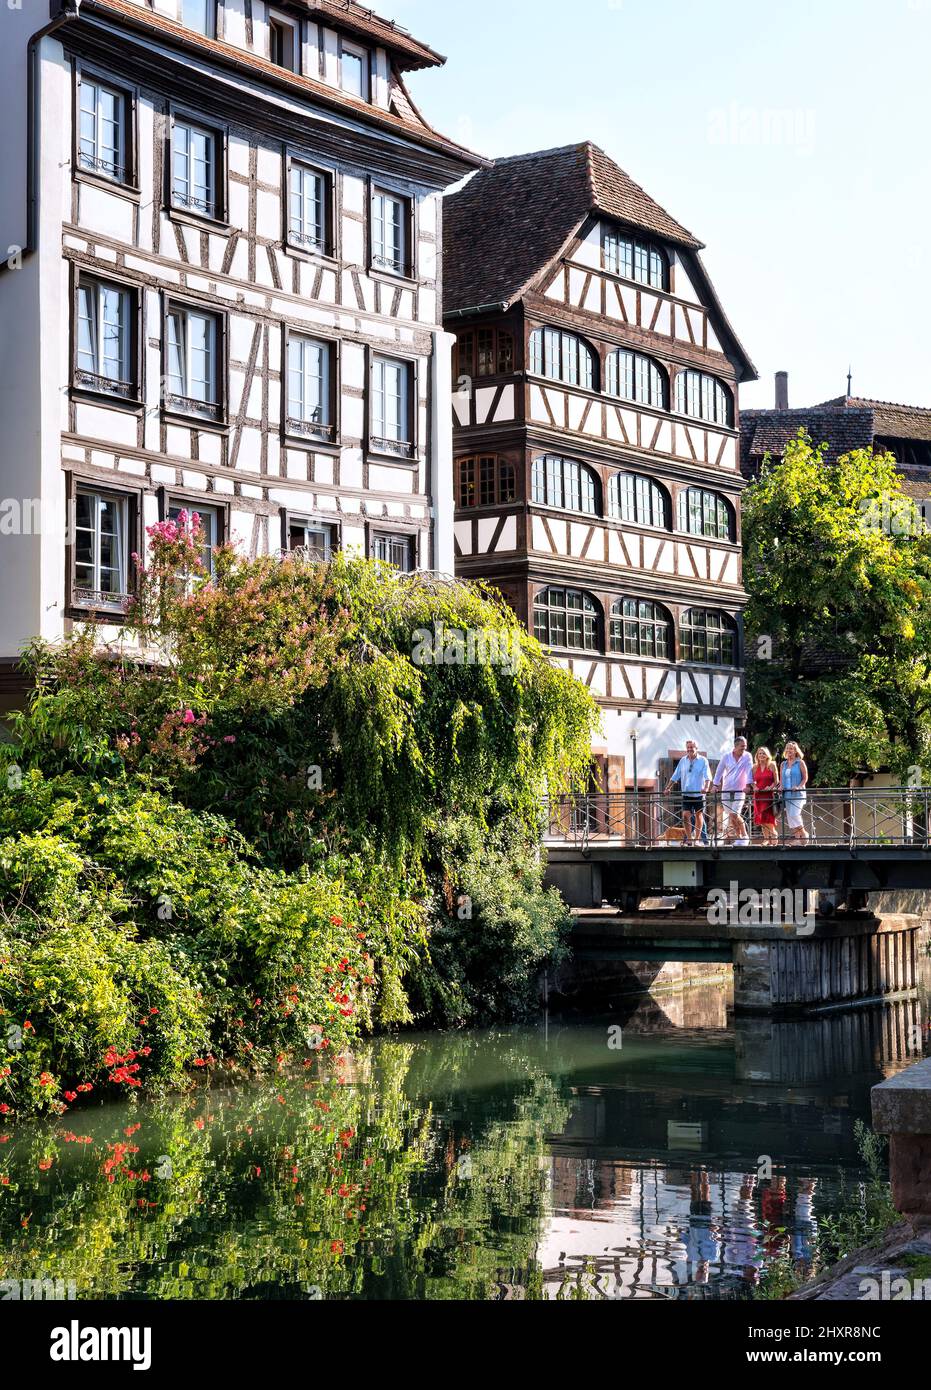 France, Strasbourg, the historic center listed as World Heritage by UNESCO, La Petite France, around the Benjamin Zix square and the Pheasant bridge. Stock Photo